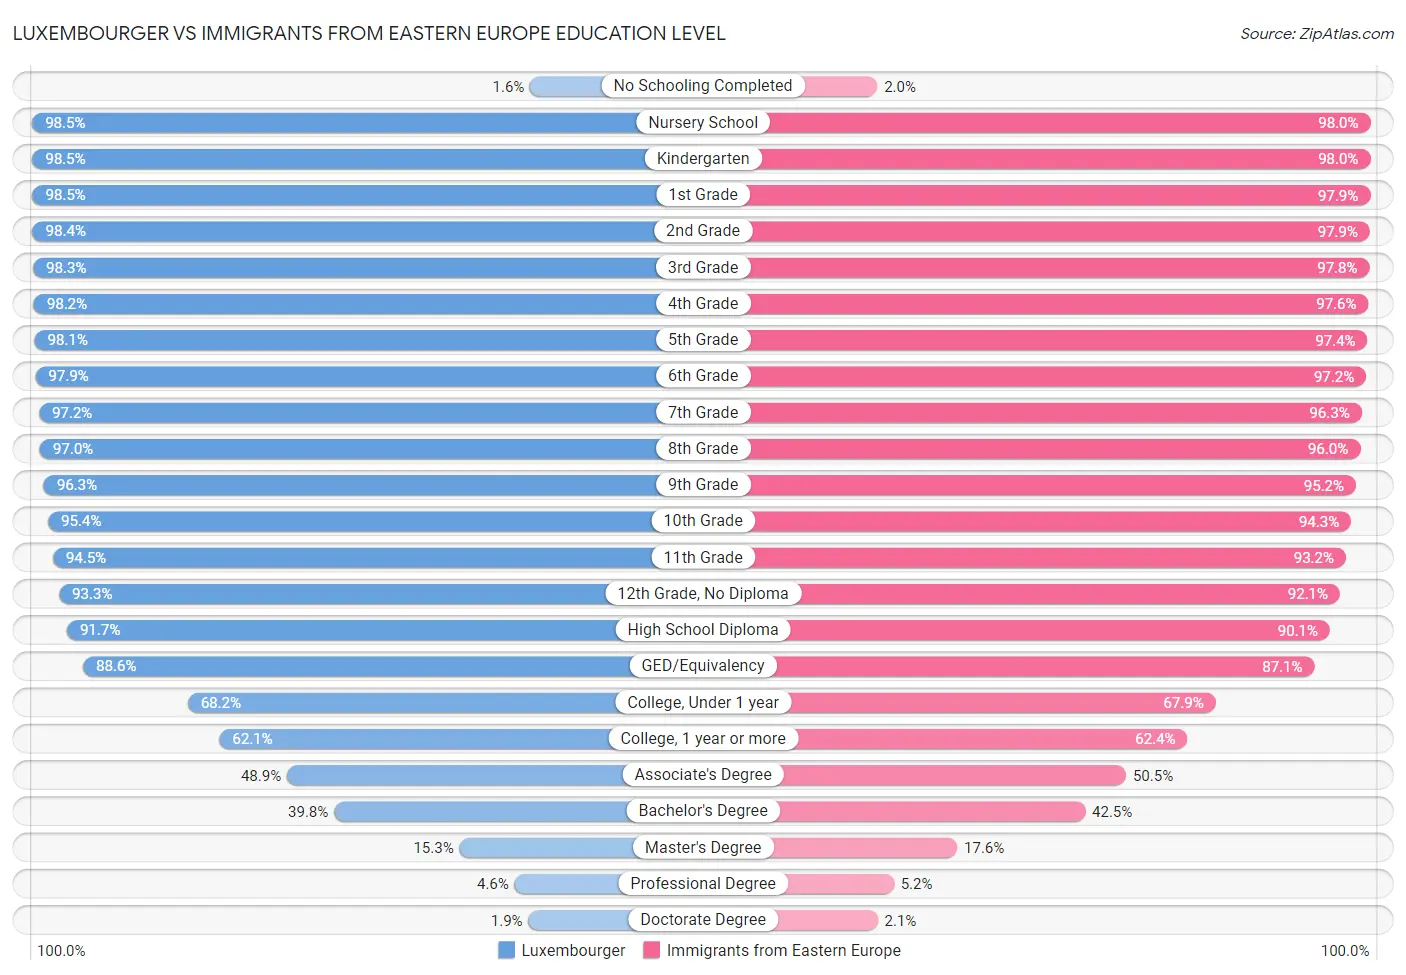 Luxembourger vs Immigrants from Eastern Europe Education Level